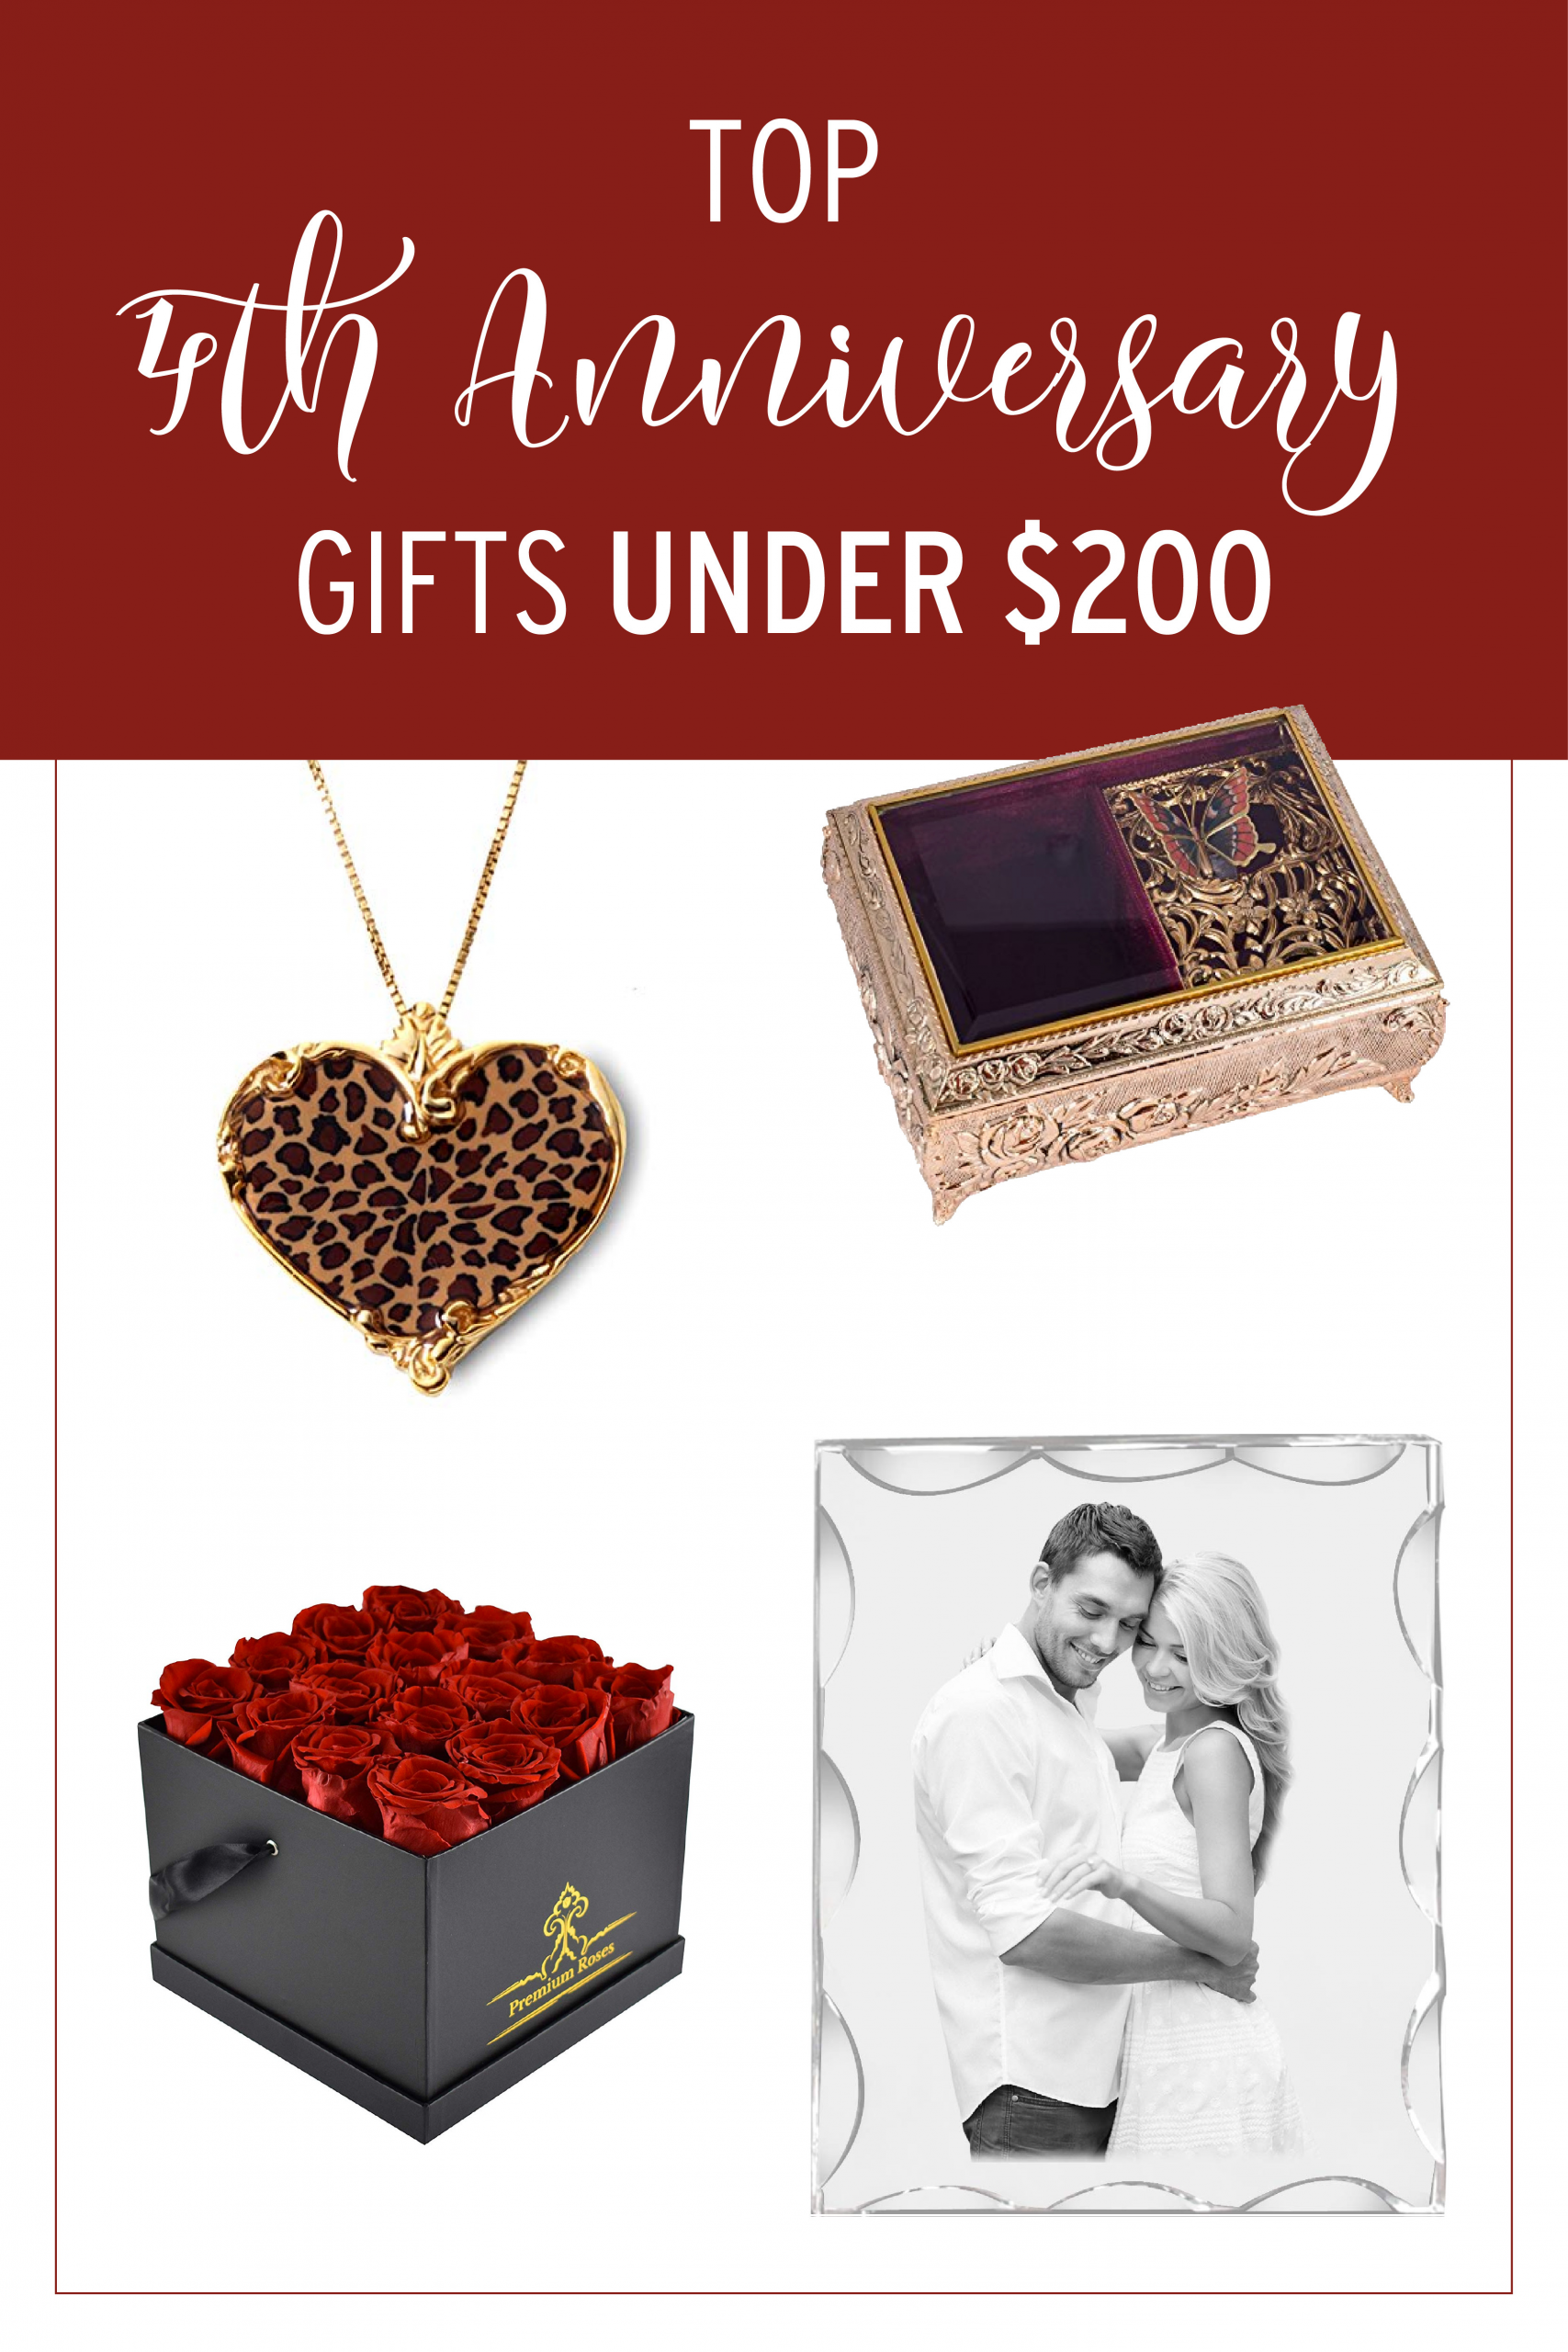 4Th Anniversary Gift Ideas For Her
 4th Anniversary Gifts for Her Under $200